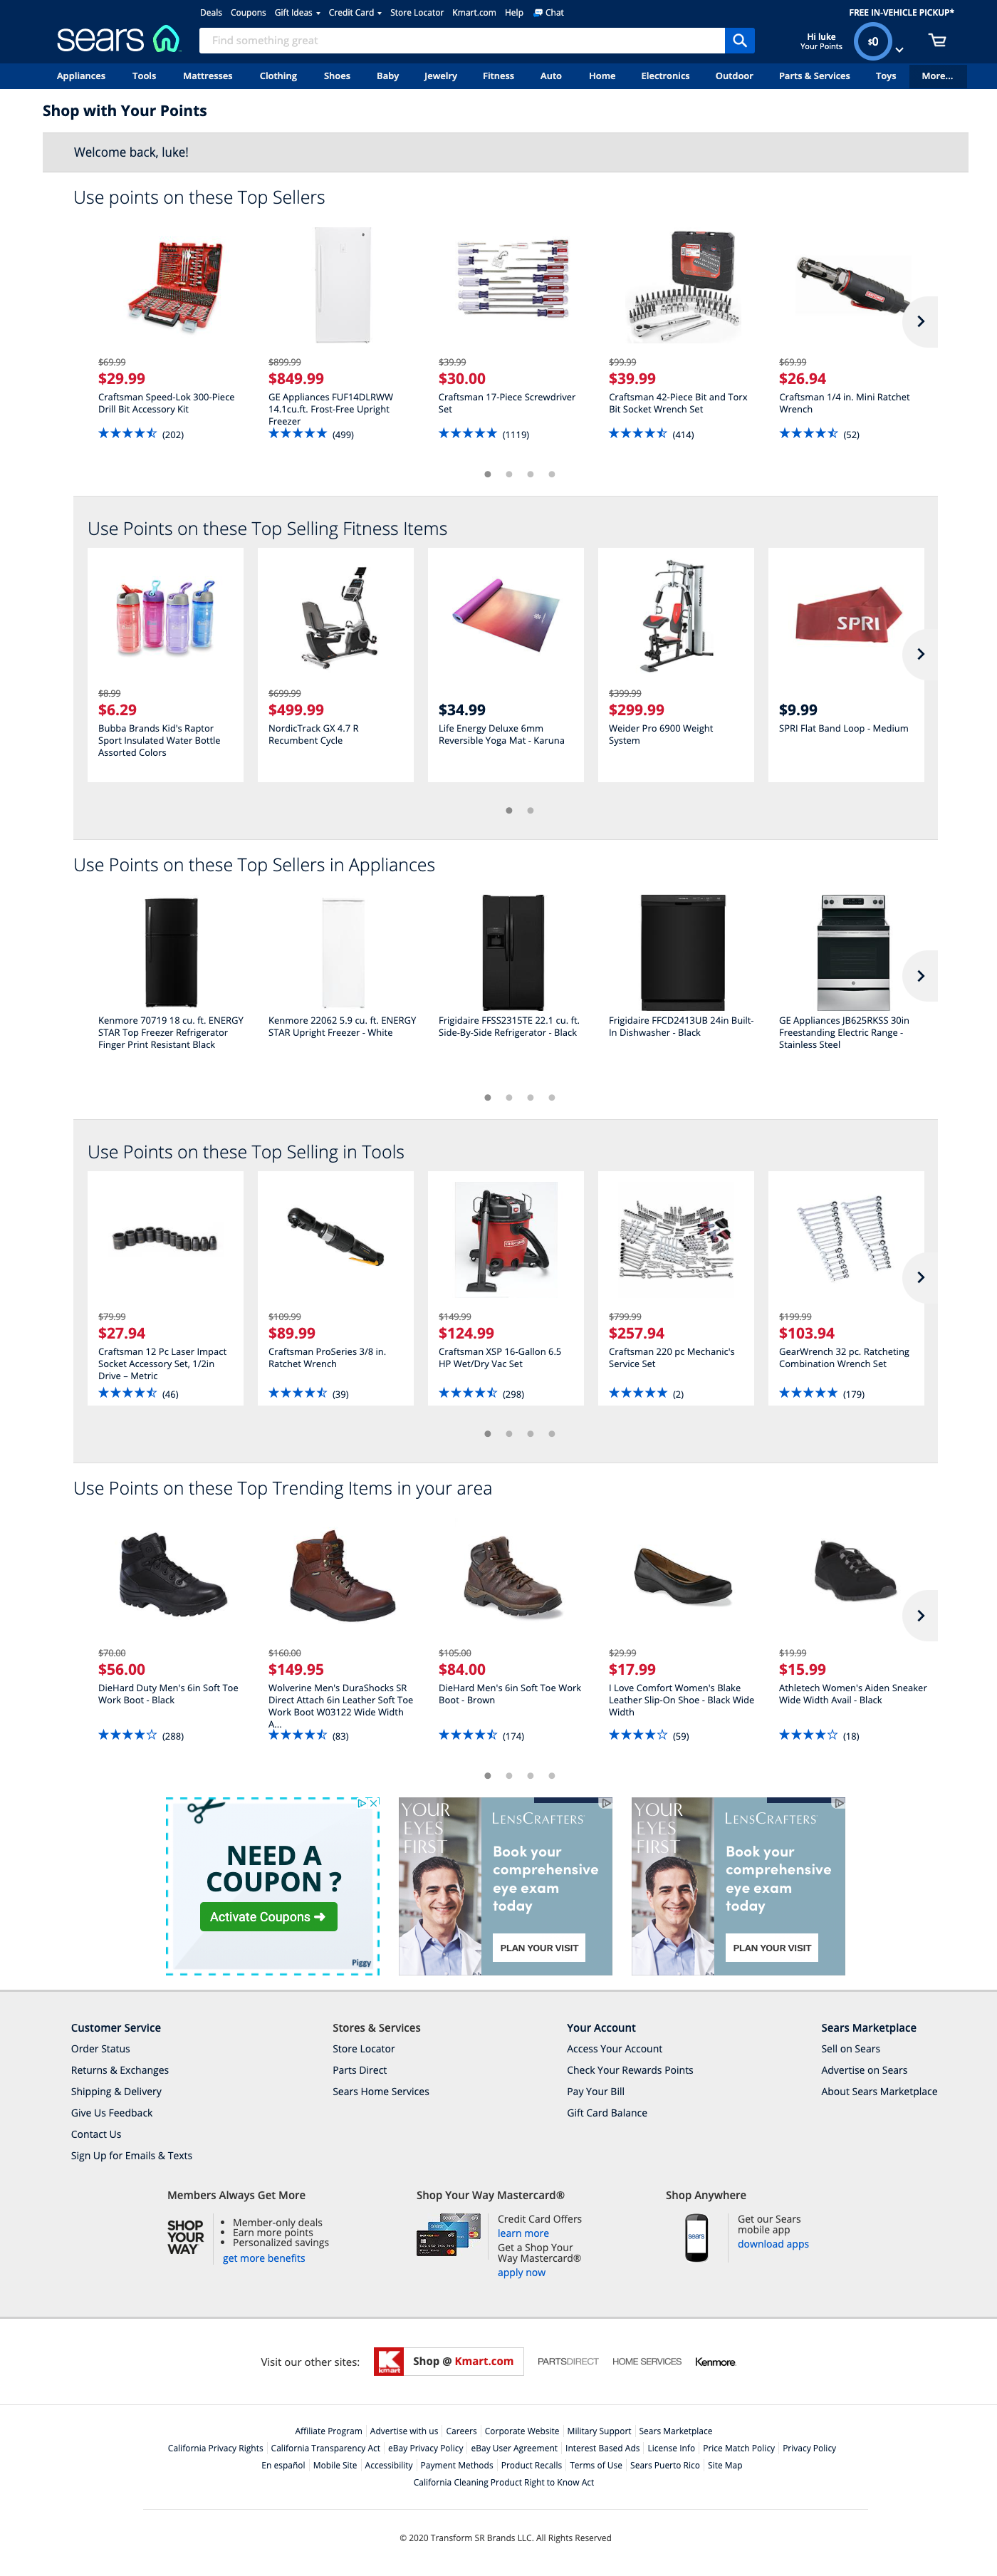 This is an example of a user-focused page utilizing a recommendation engine showing products based on a number of user-criteria